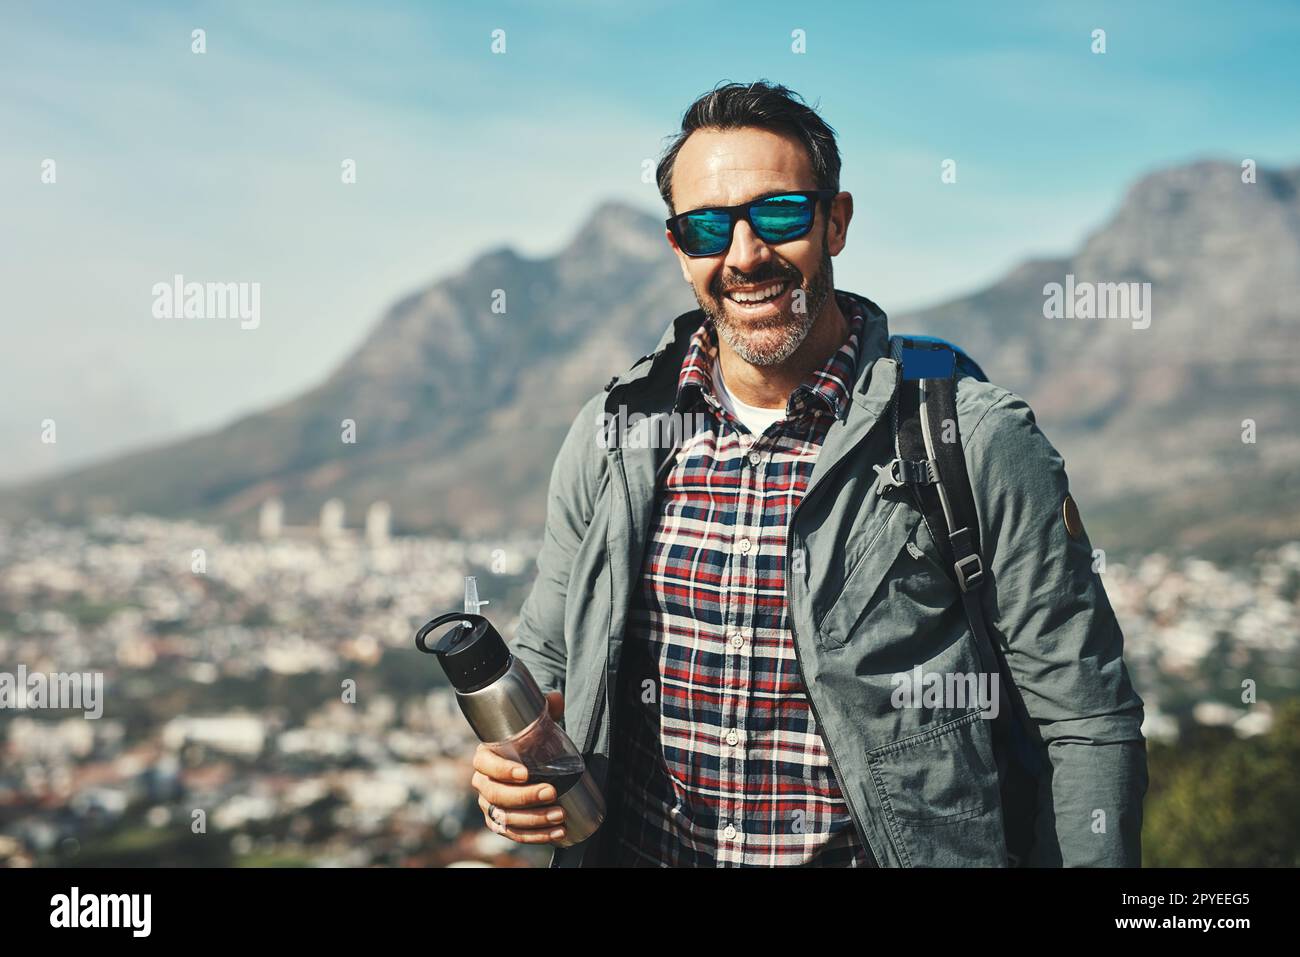 What a wonderful trip its been. Portrait of a middle aged man smiling in front of a mountain landscape. Stock Photo